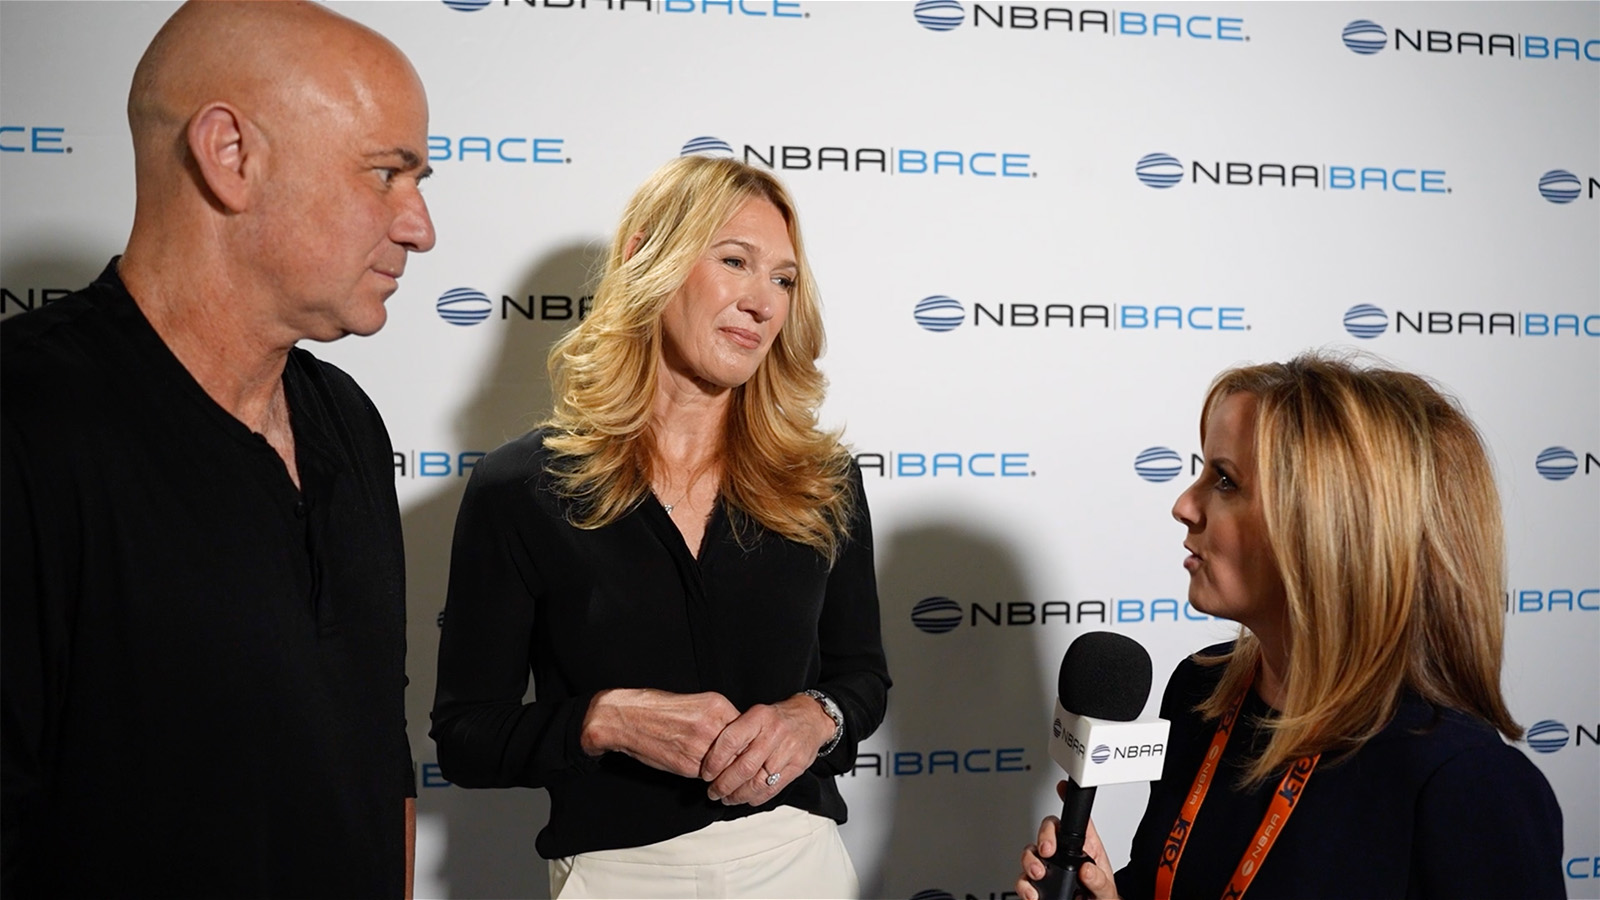 Keynote Speakers Agassi, Graf on Business Aviation and NBAA-BACE